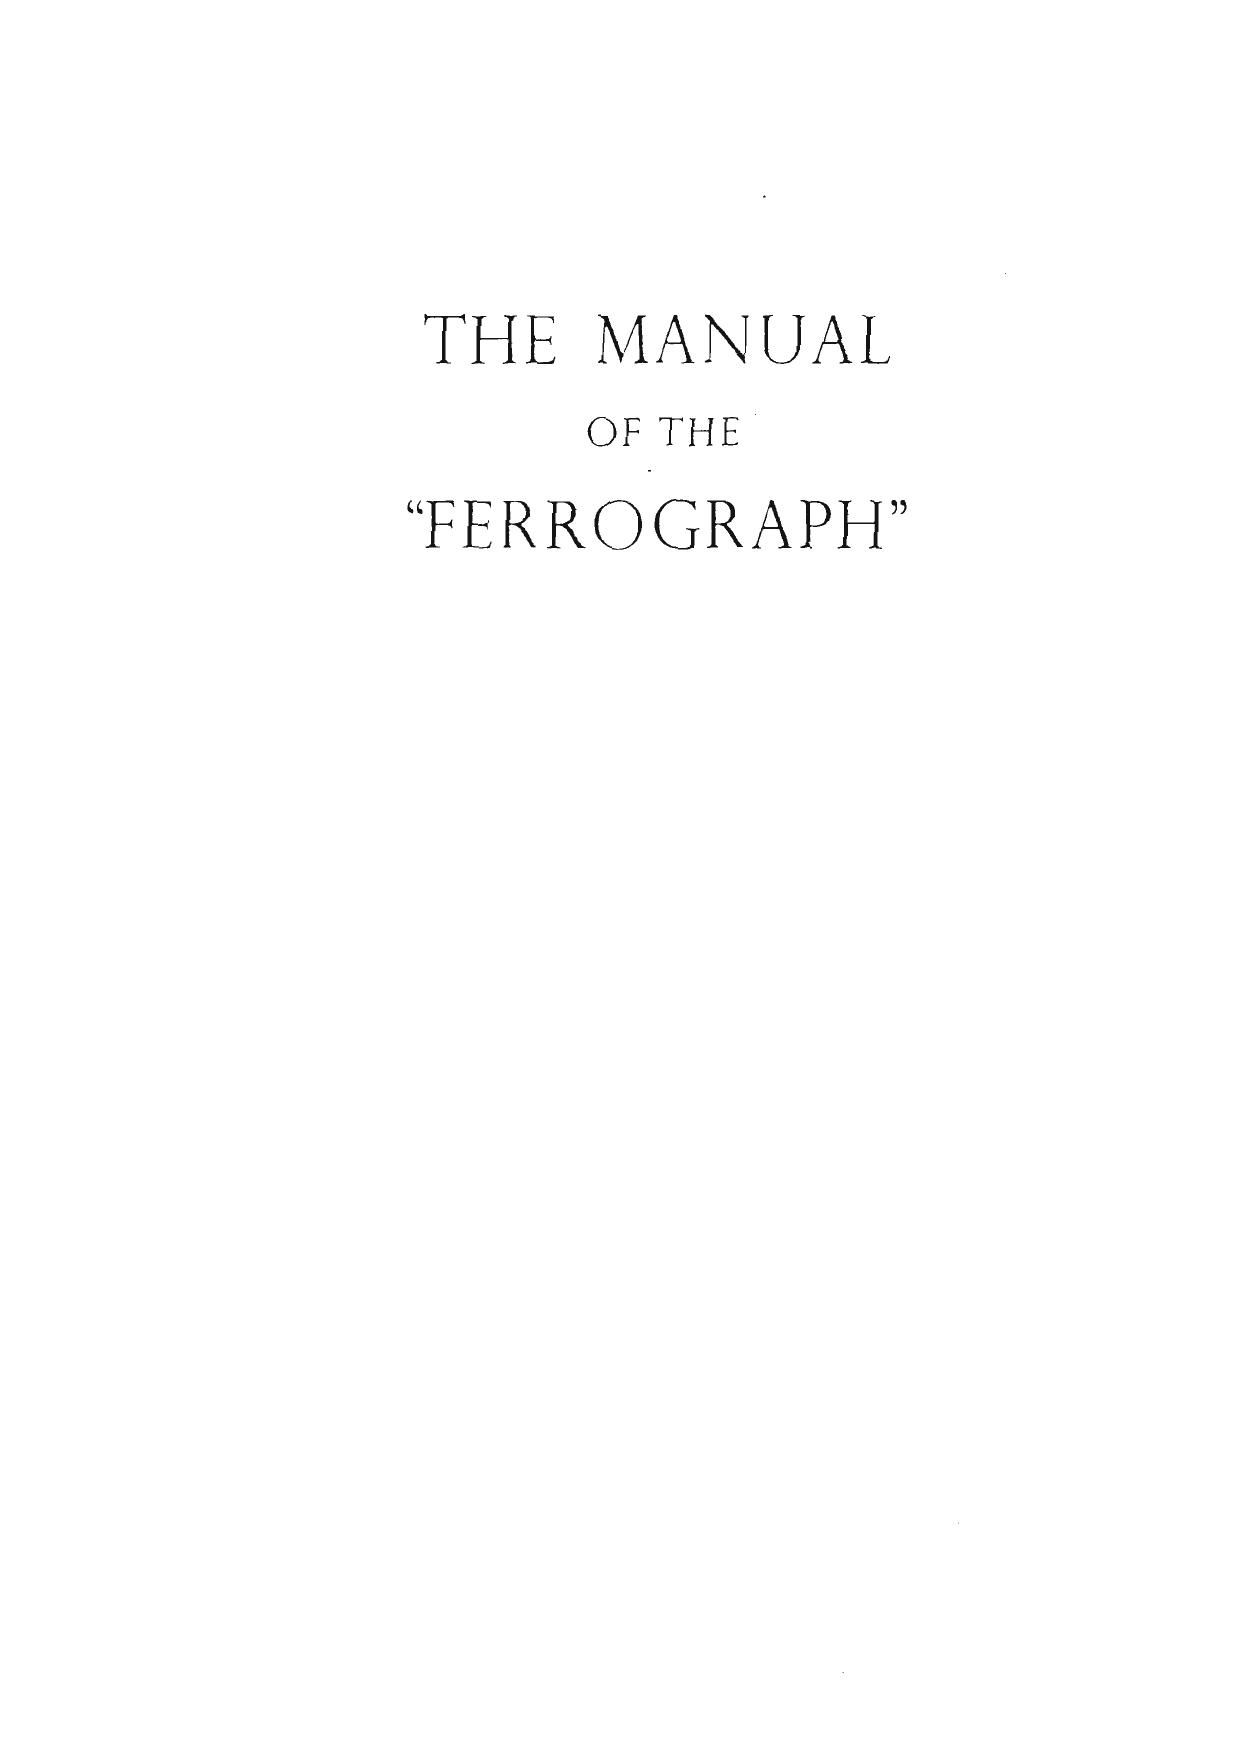 Ferrograph 4 S CON Owners Manual